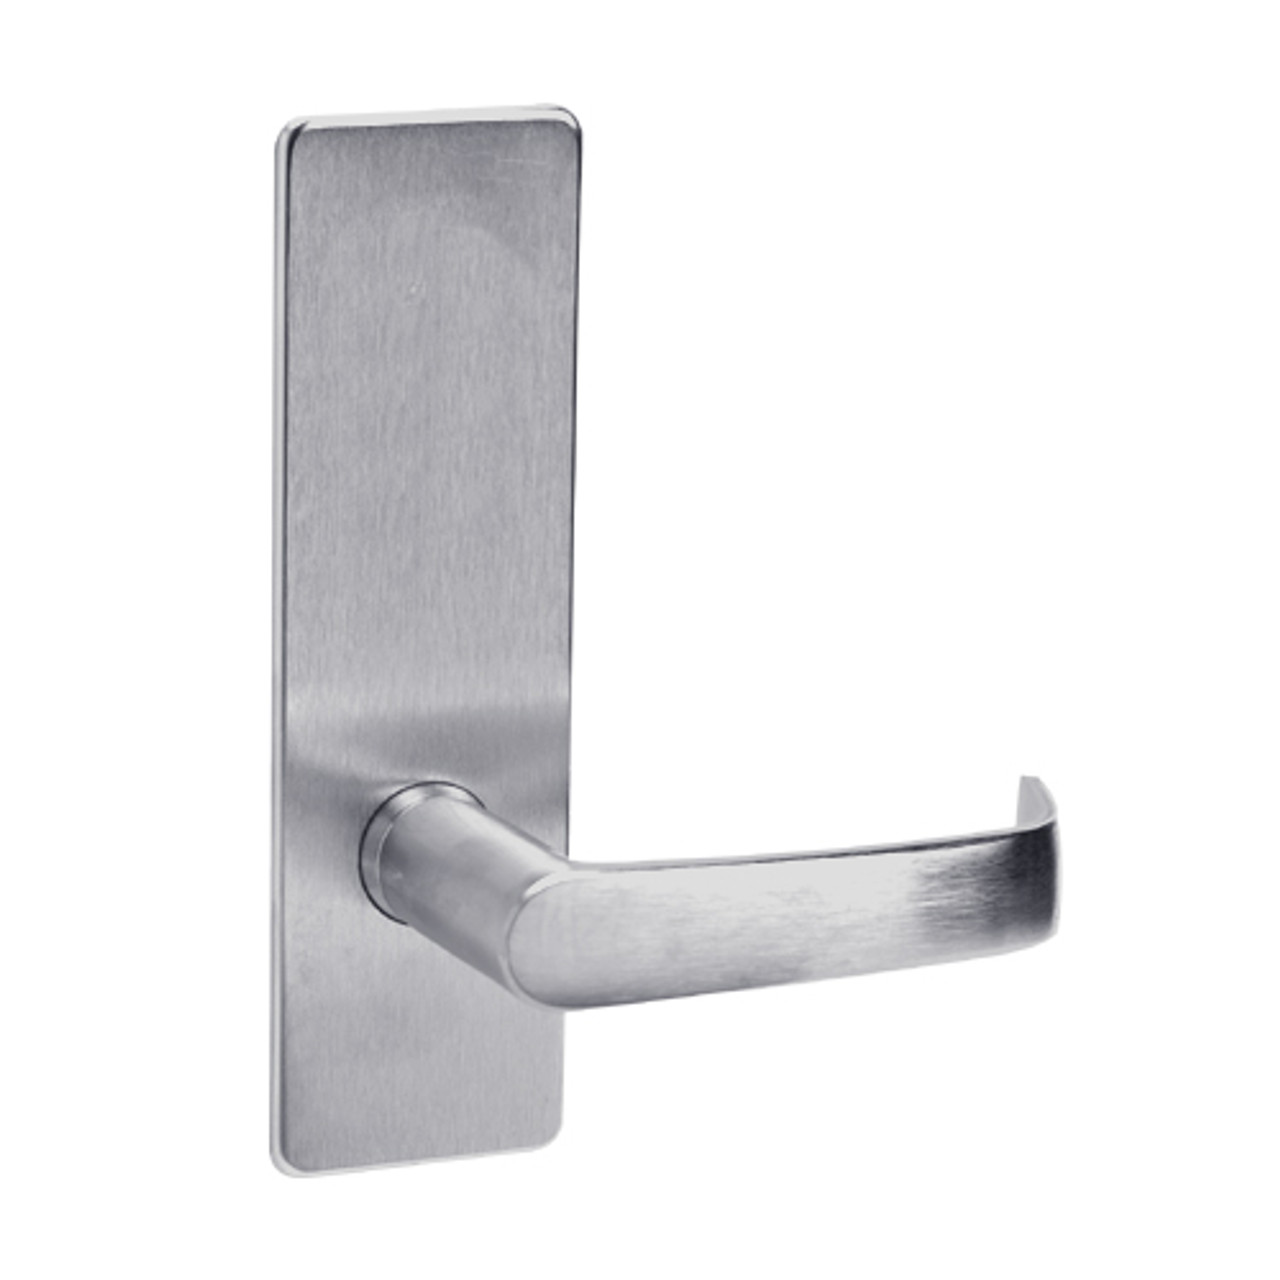 ML2020-NSP-626-M31 Corbin Russwin ML2000 Series Mortise Privacy Locksets with Newport Lever in Satin Chrome